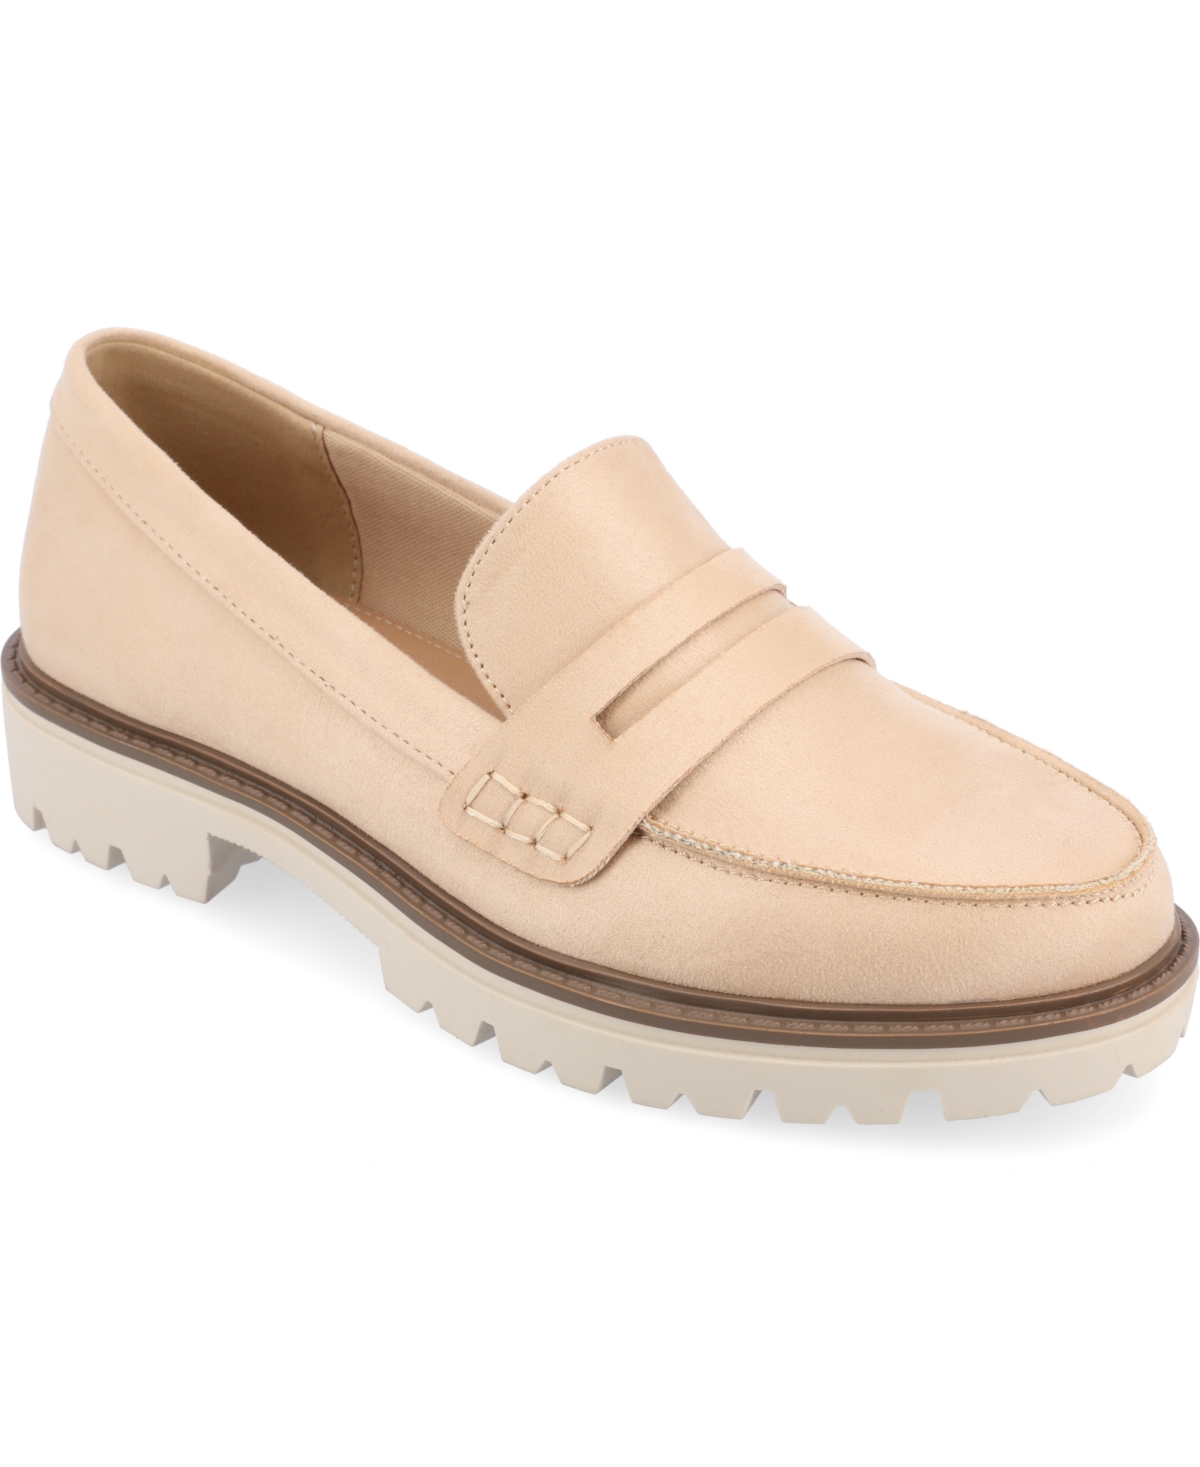 Shop Journee Collection Women's Kenly Lug Sole Loafers In Sand